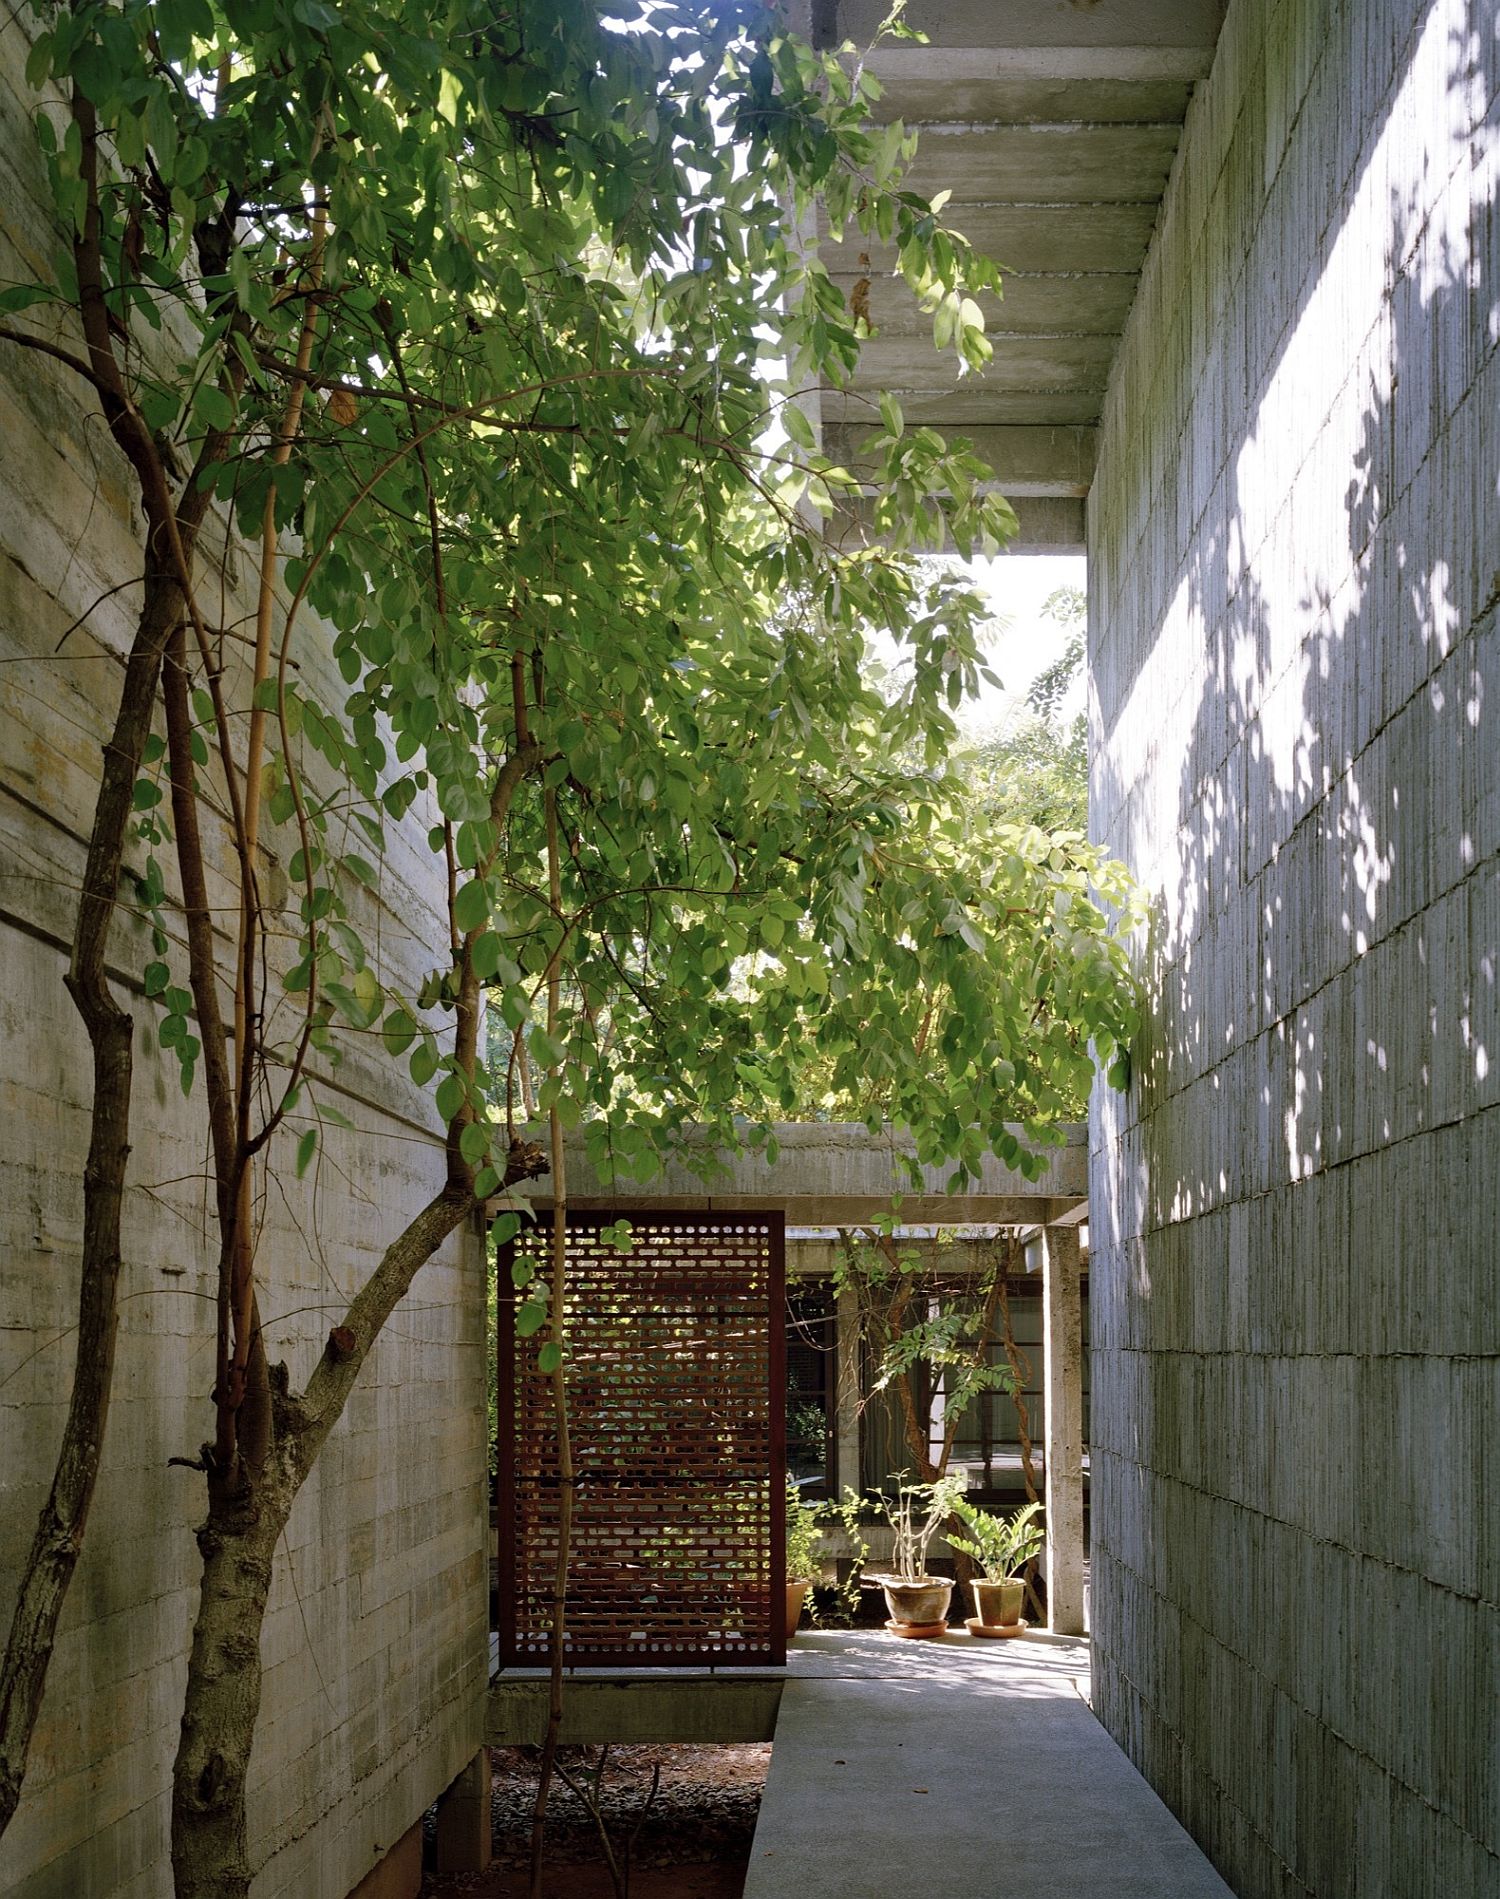 Entrance-and-a-series-of-courtyards-filled-with-greenery-add-to-the-appeal-of-the-house